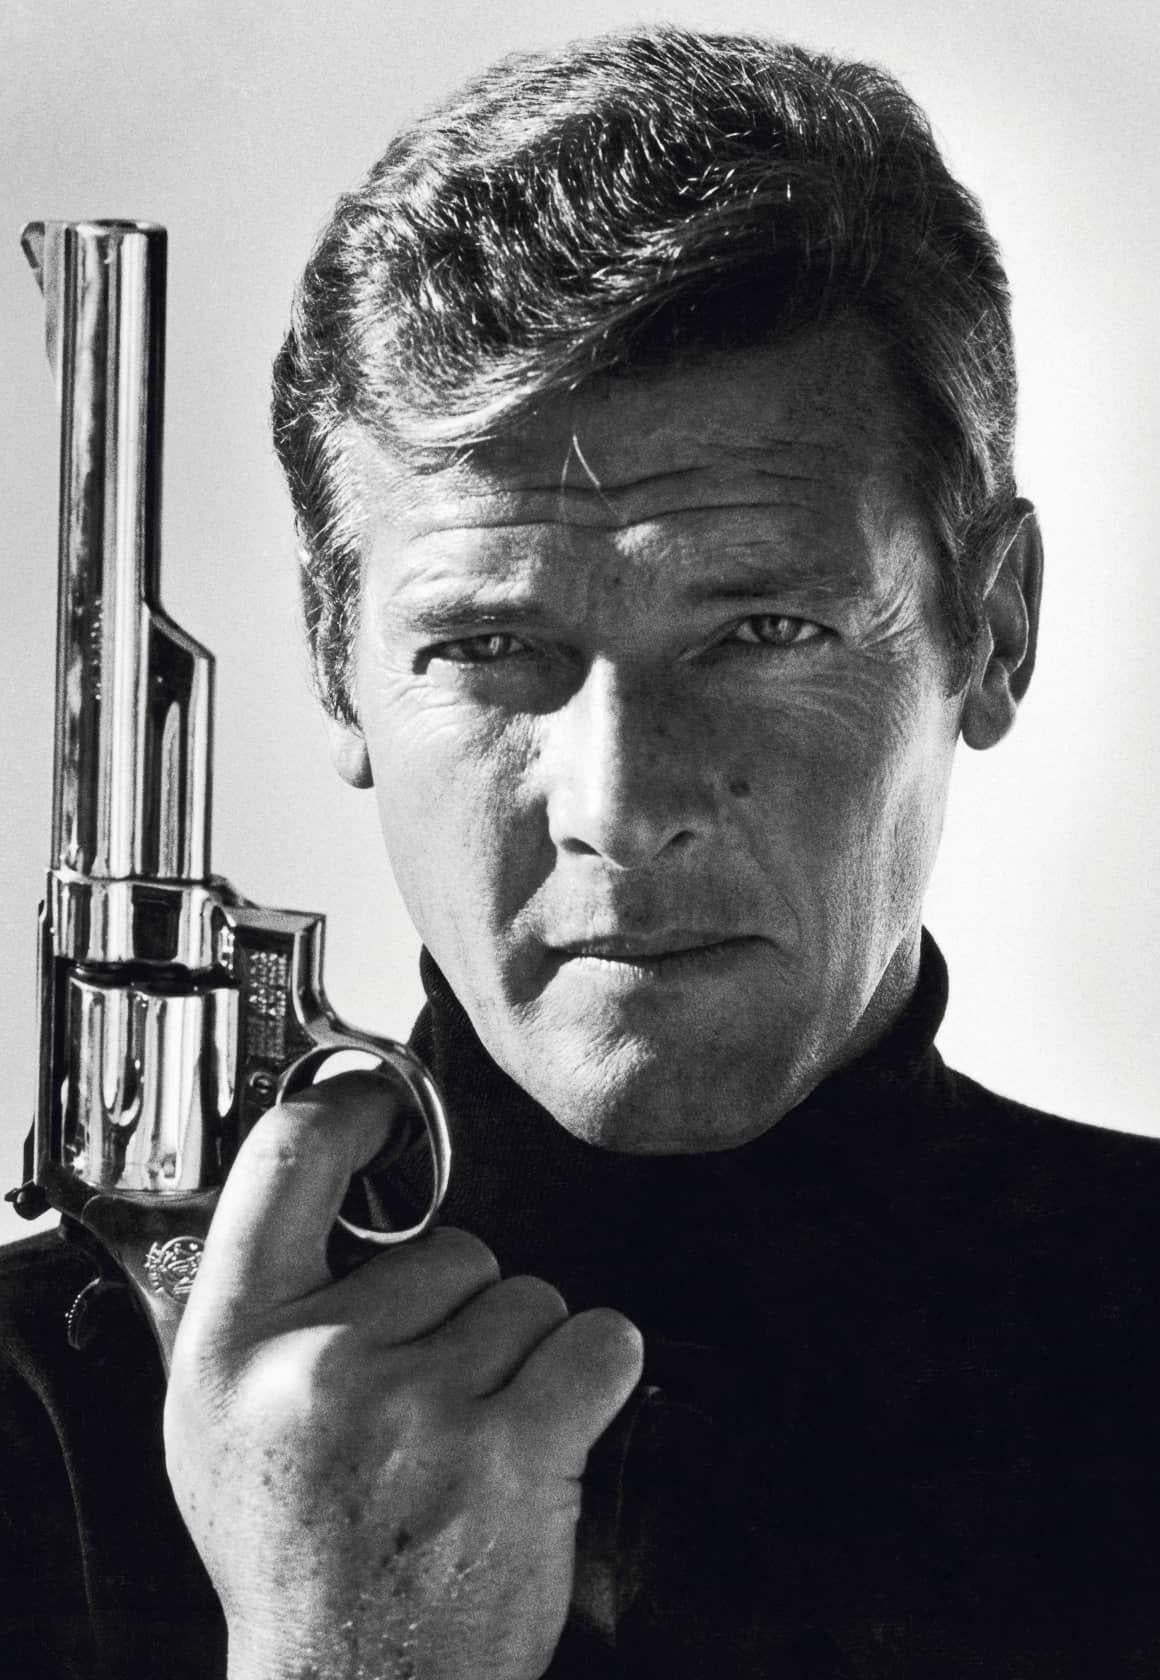 Terry O'Neill Portrait Photograph - Roger Moore as James Bond (Co-signed)